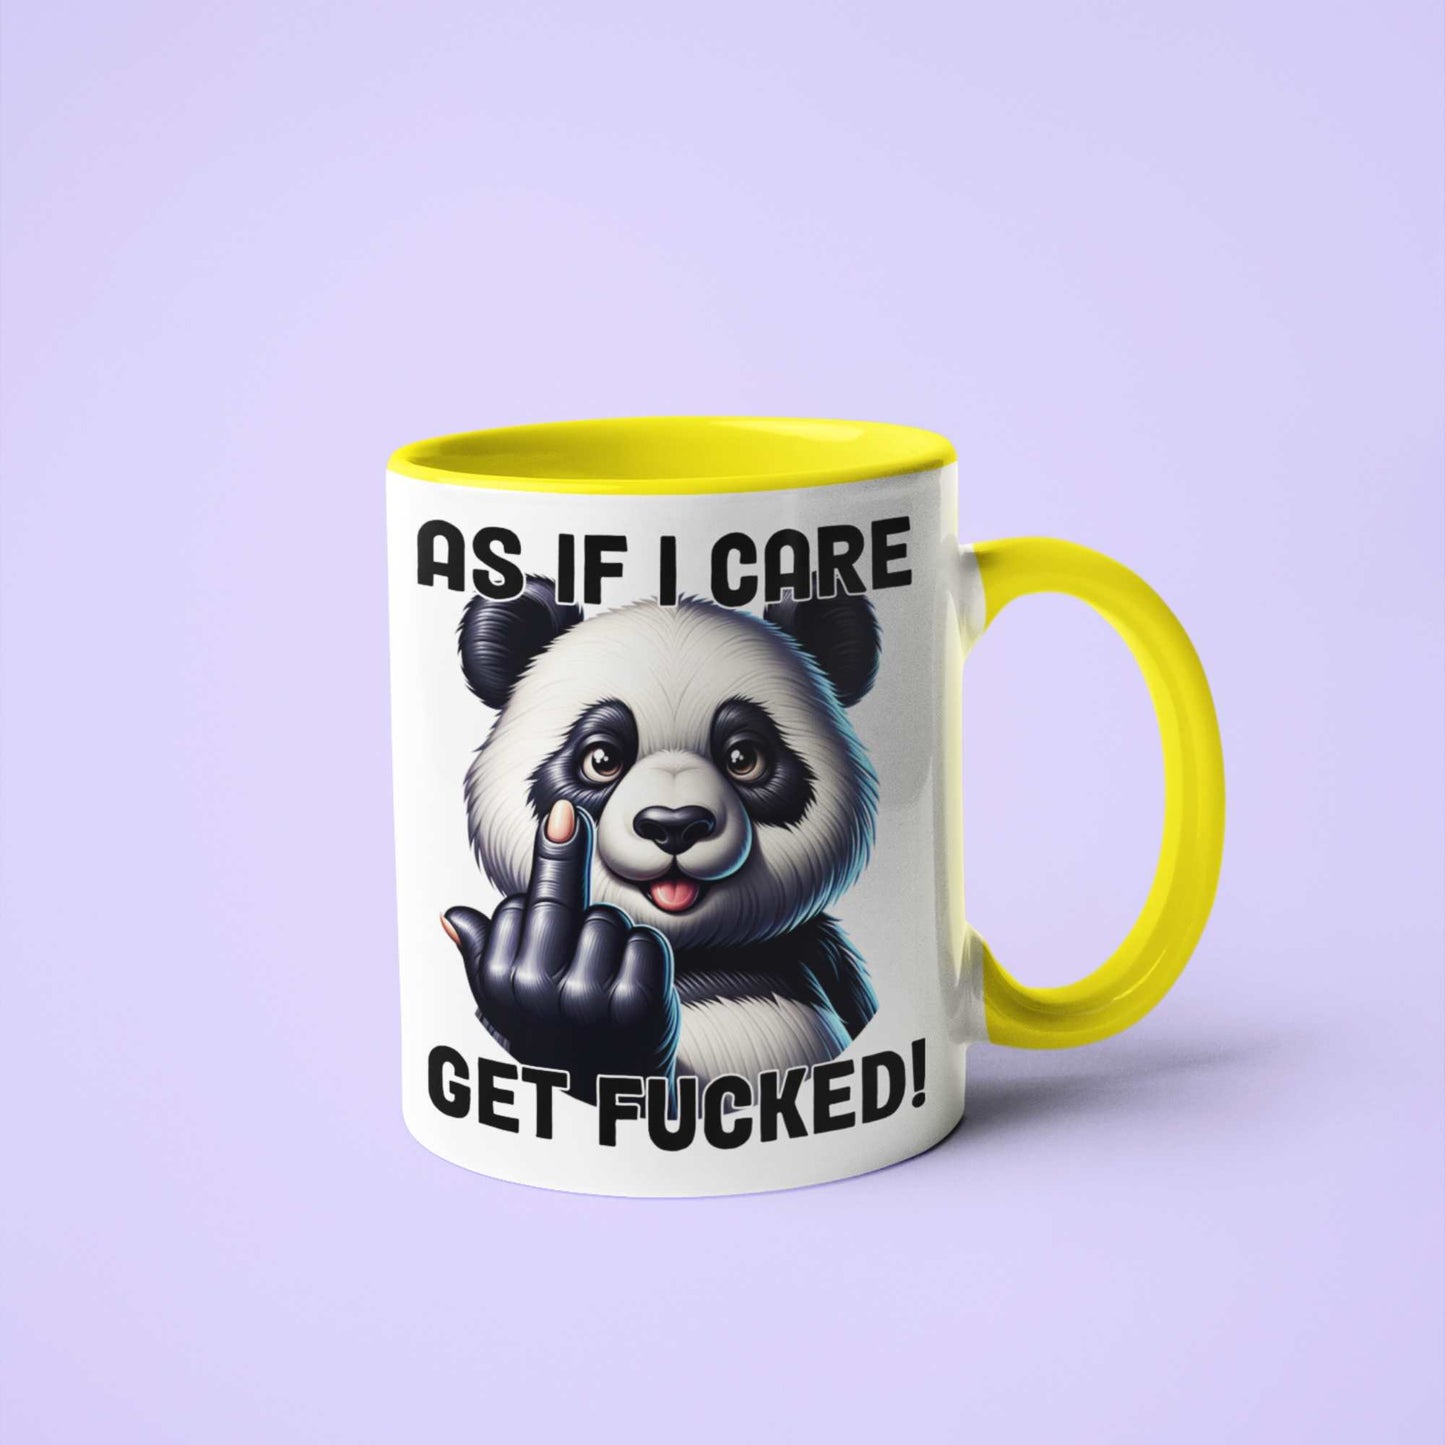 As if I care Get Fucked Rude Coffee Mug Gifts for Her Birthday